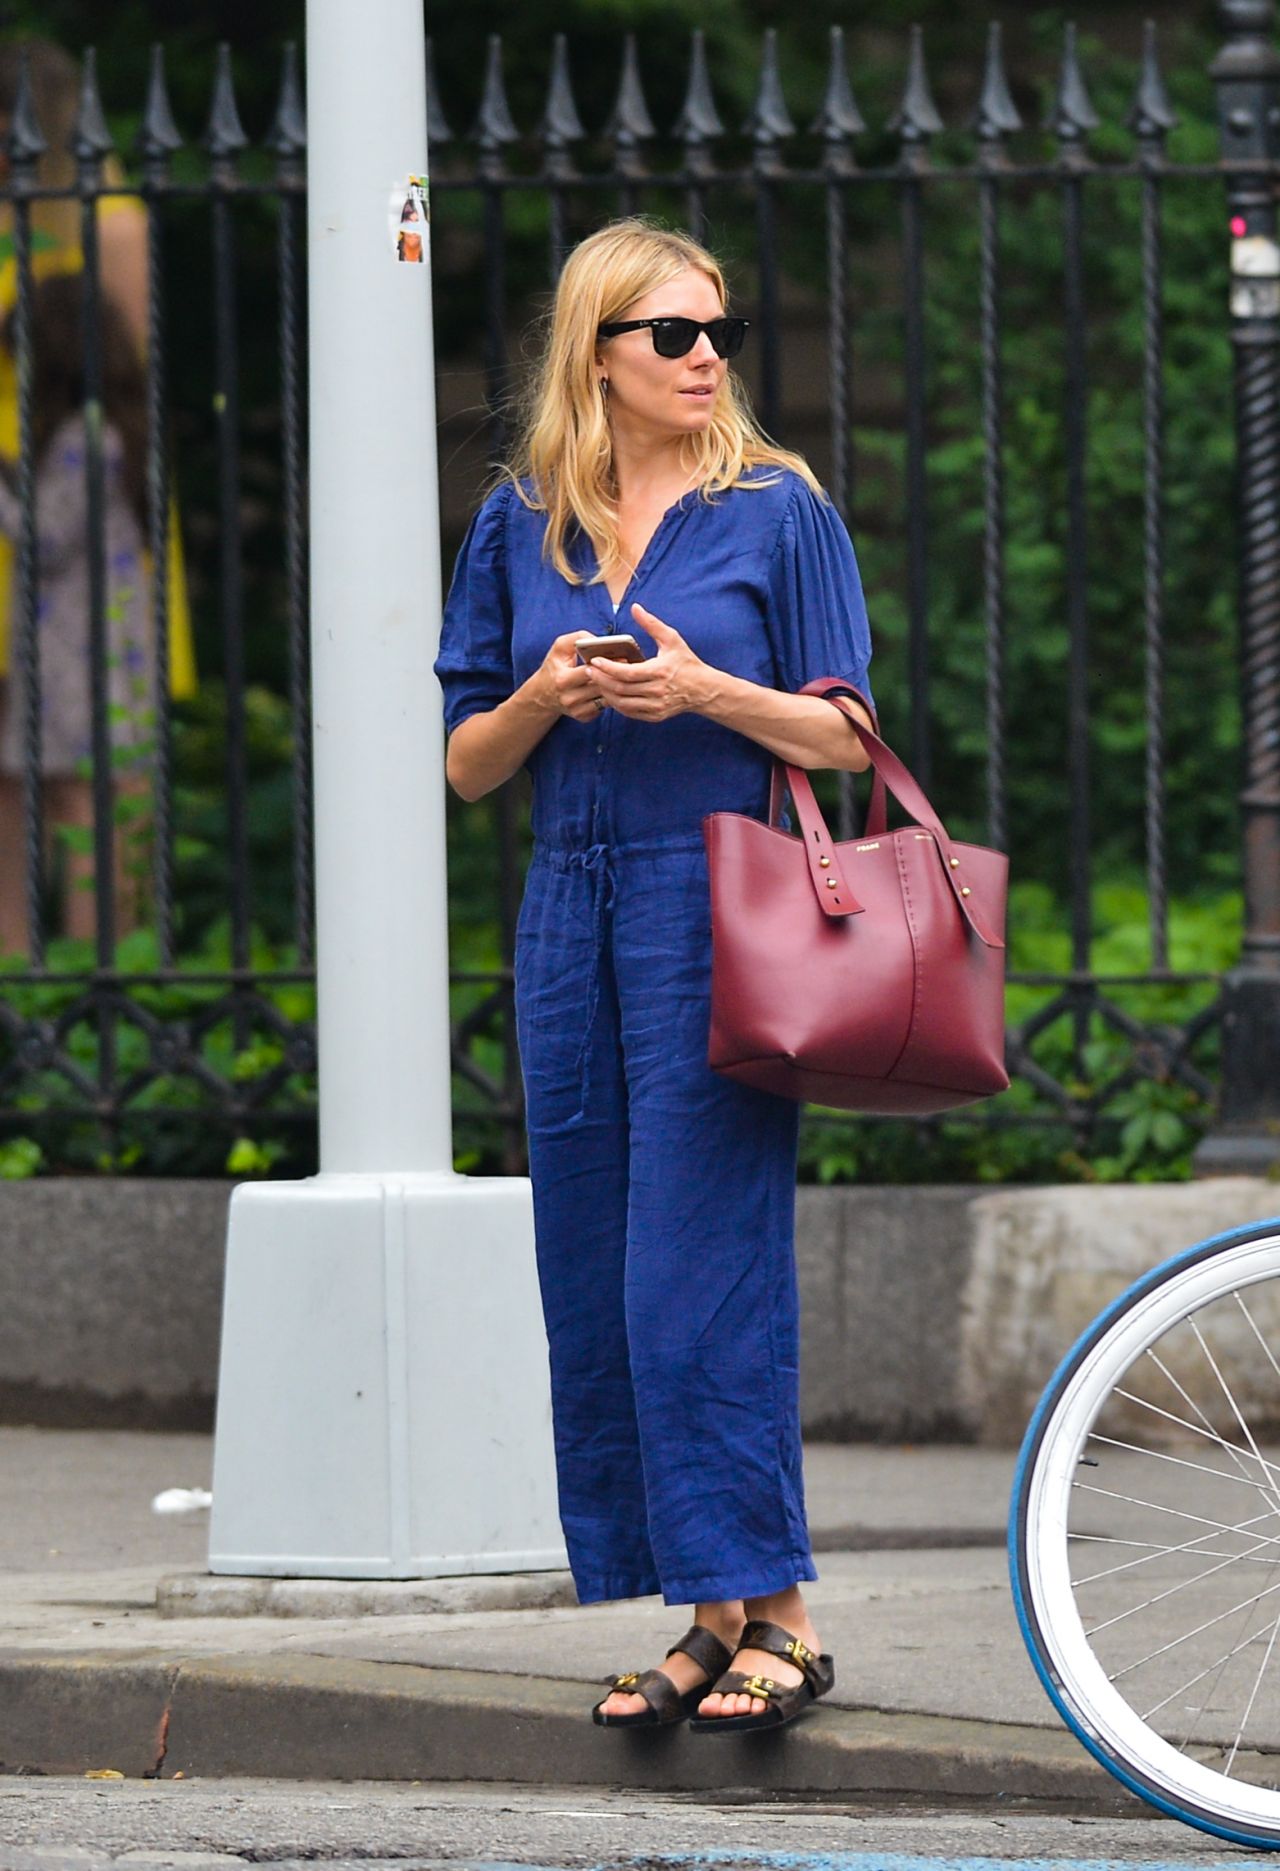 Sienna Miller New York City May 29, 2019 – Star Style